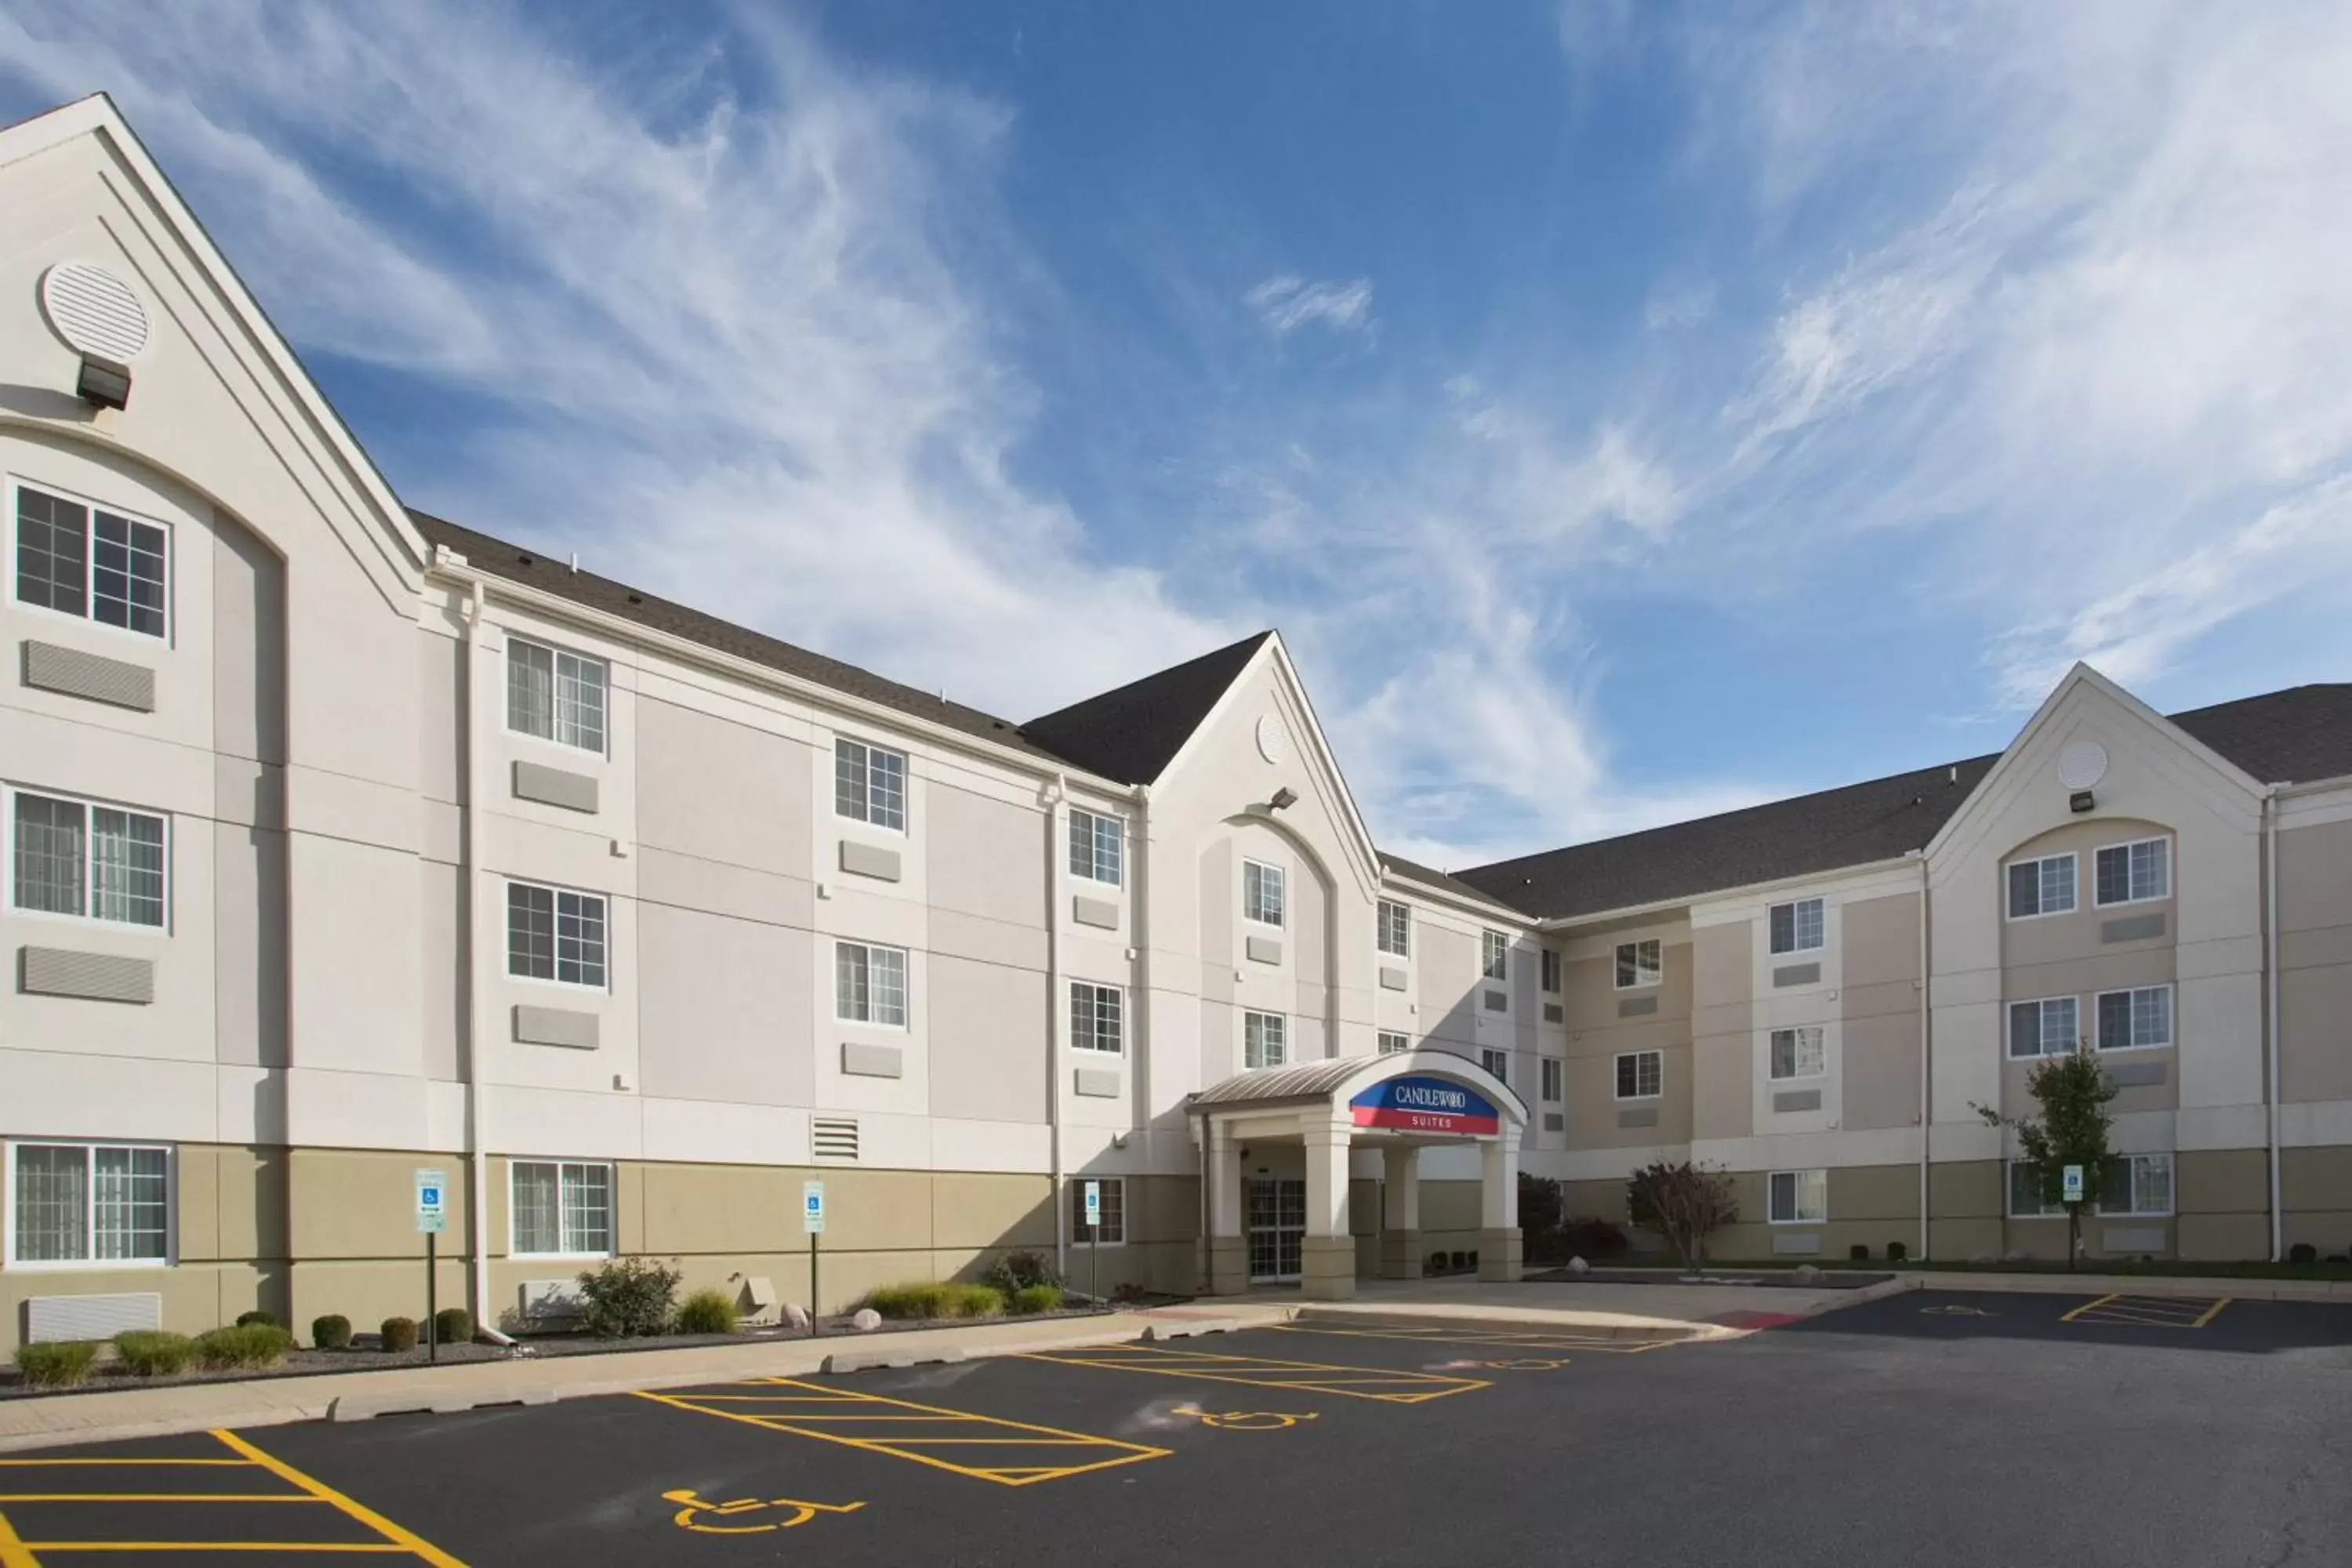 Property Building in Candlewood Suites - Peoria at Grand Prairie, an IHG Hotel